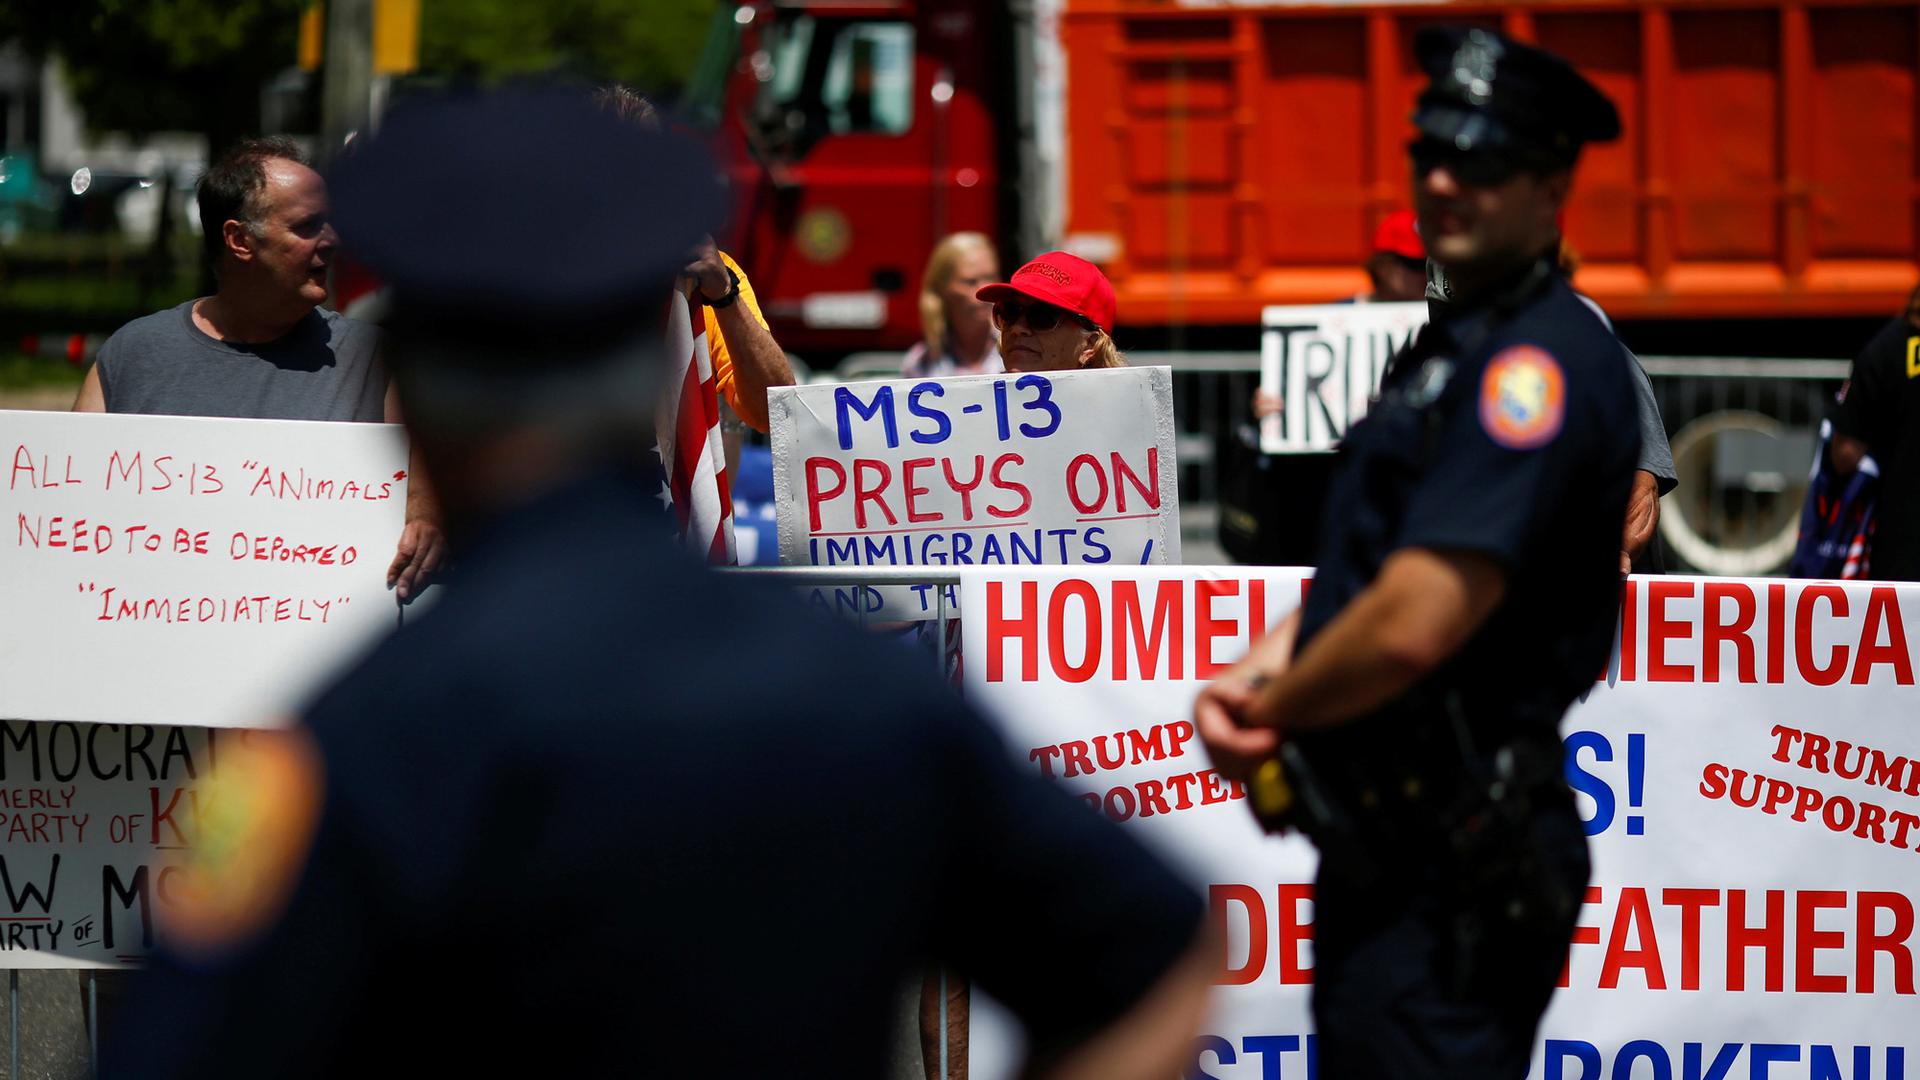 Police stand along barricades while protesters hold signs about the MS-13 gang.